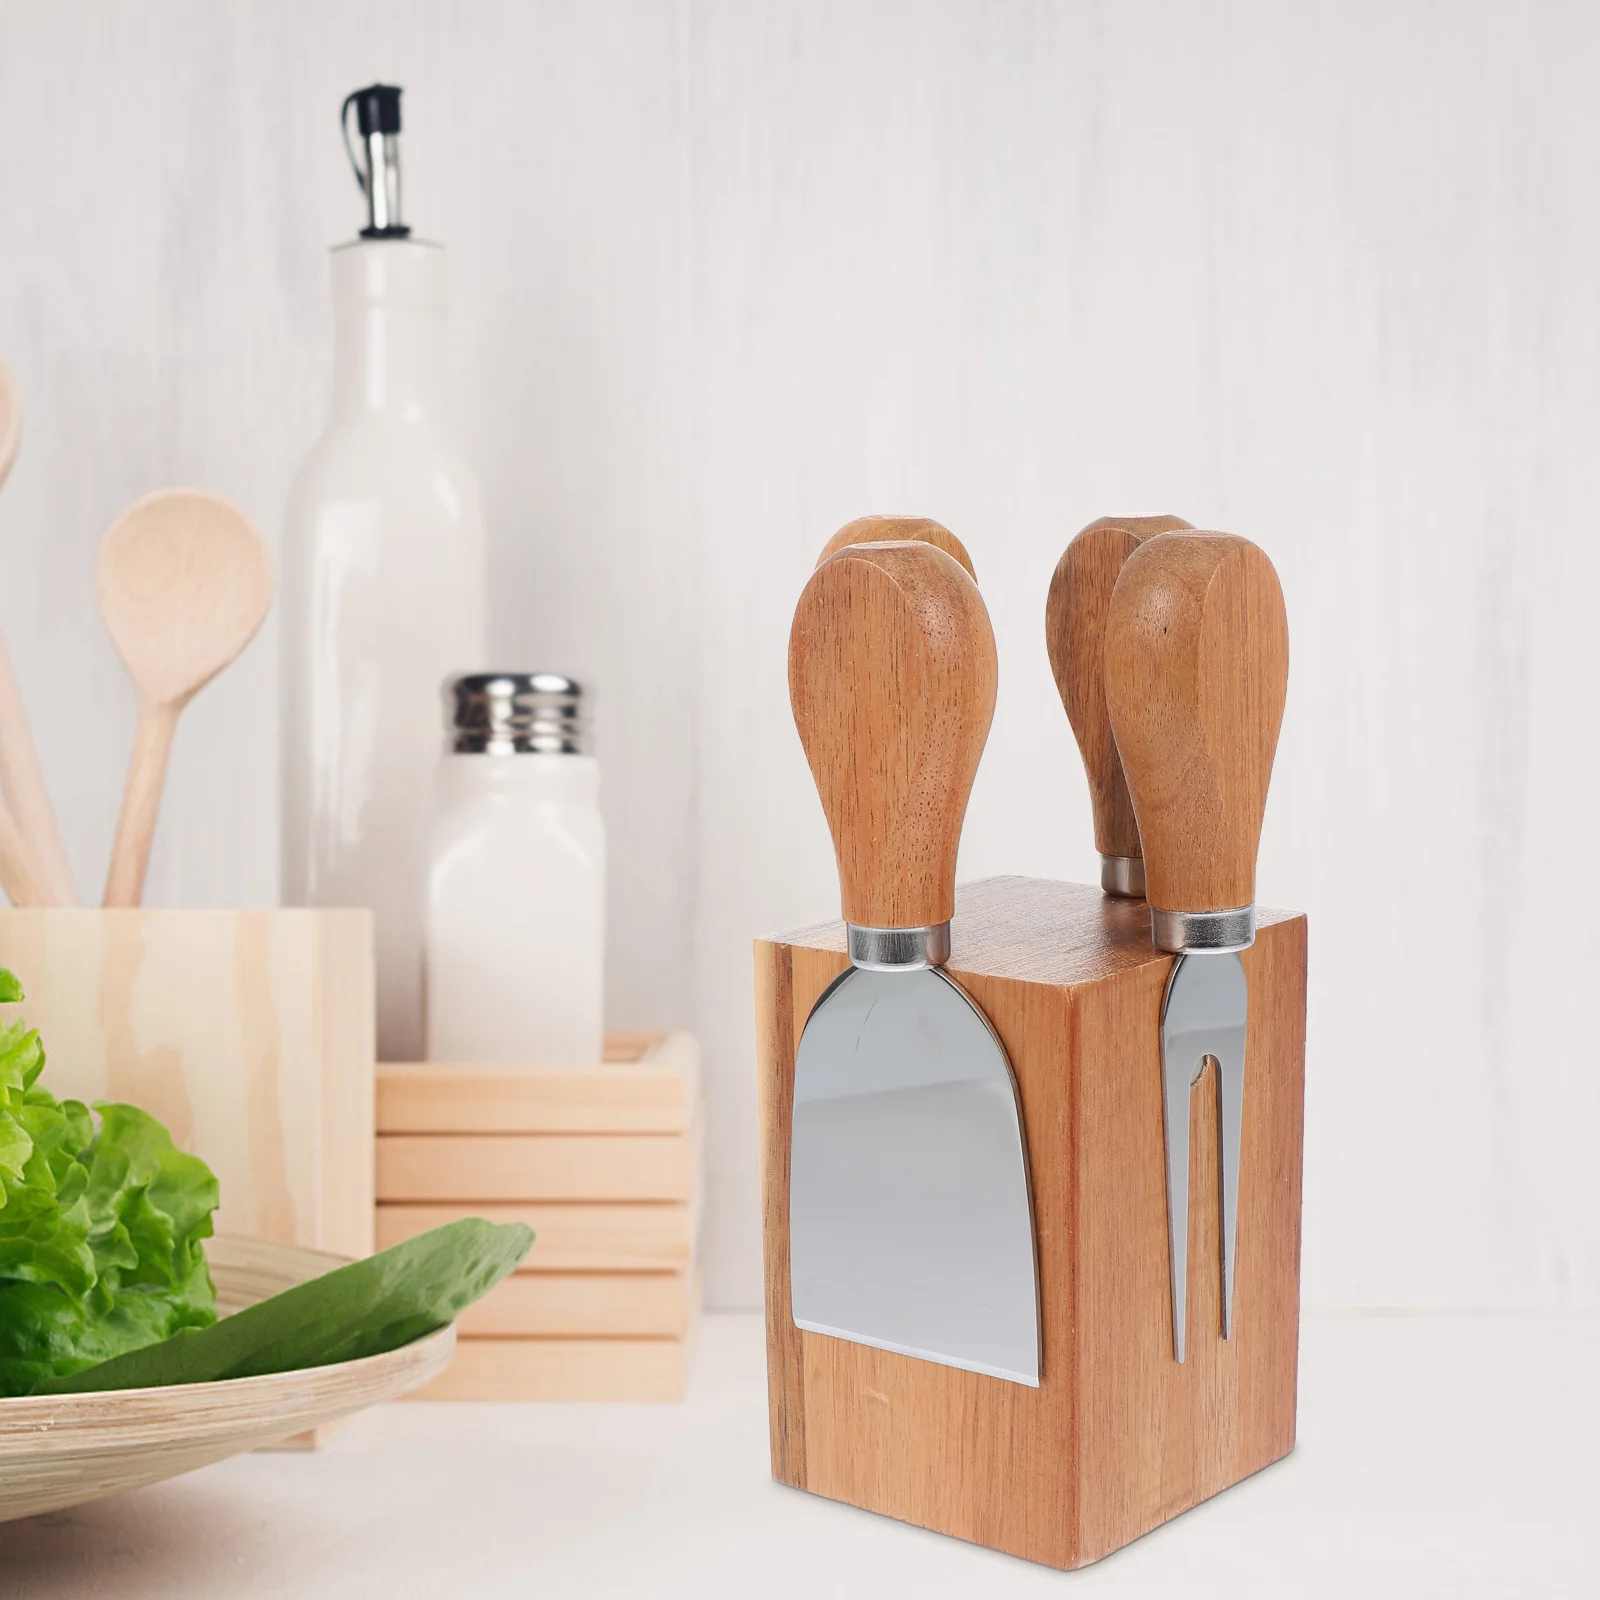 

5pcs/set Wooden Cheese Knives Delicate Durable Nice Magnet Cutter Holder Cheese Tool Rack for Kitchen Storage Tool